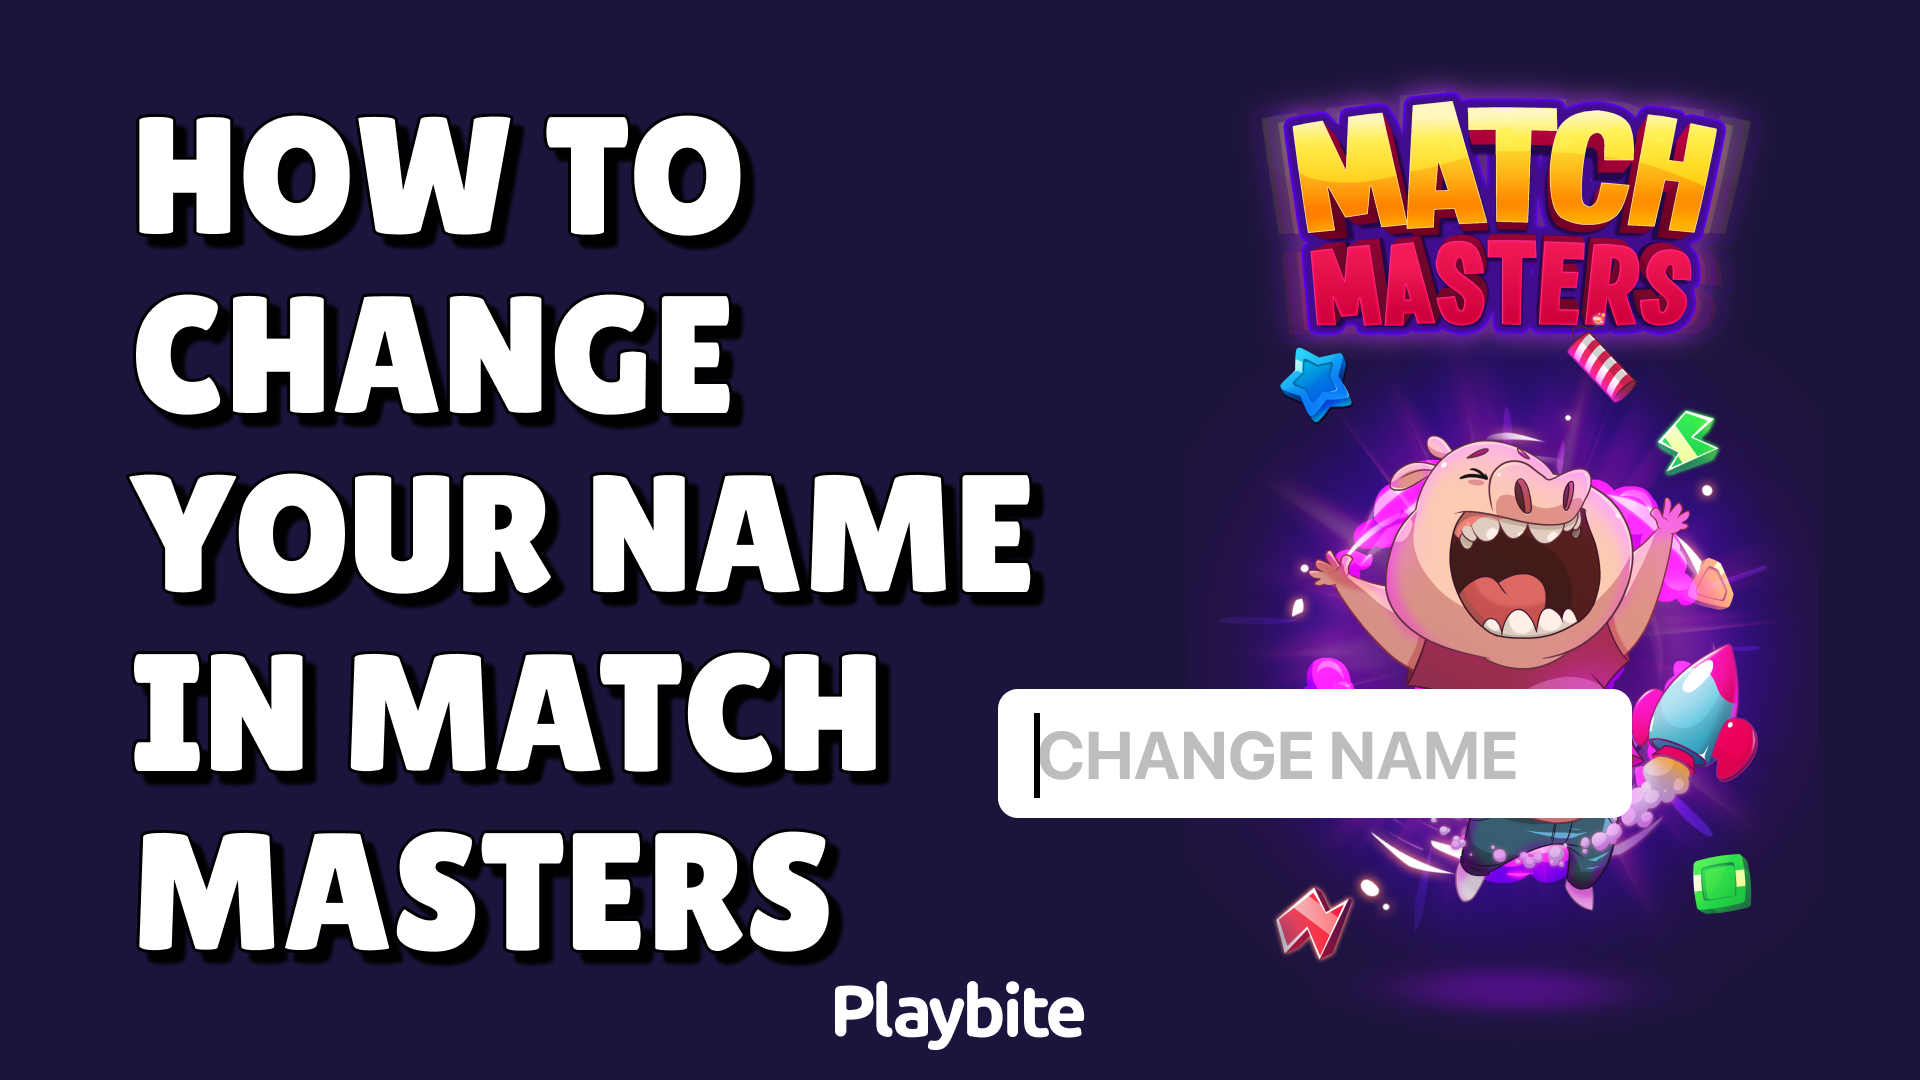 How To Change Name In Match Masters